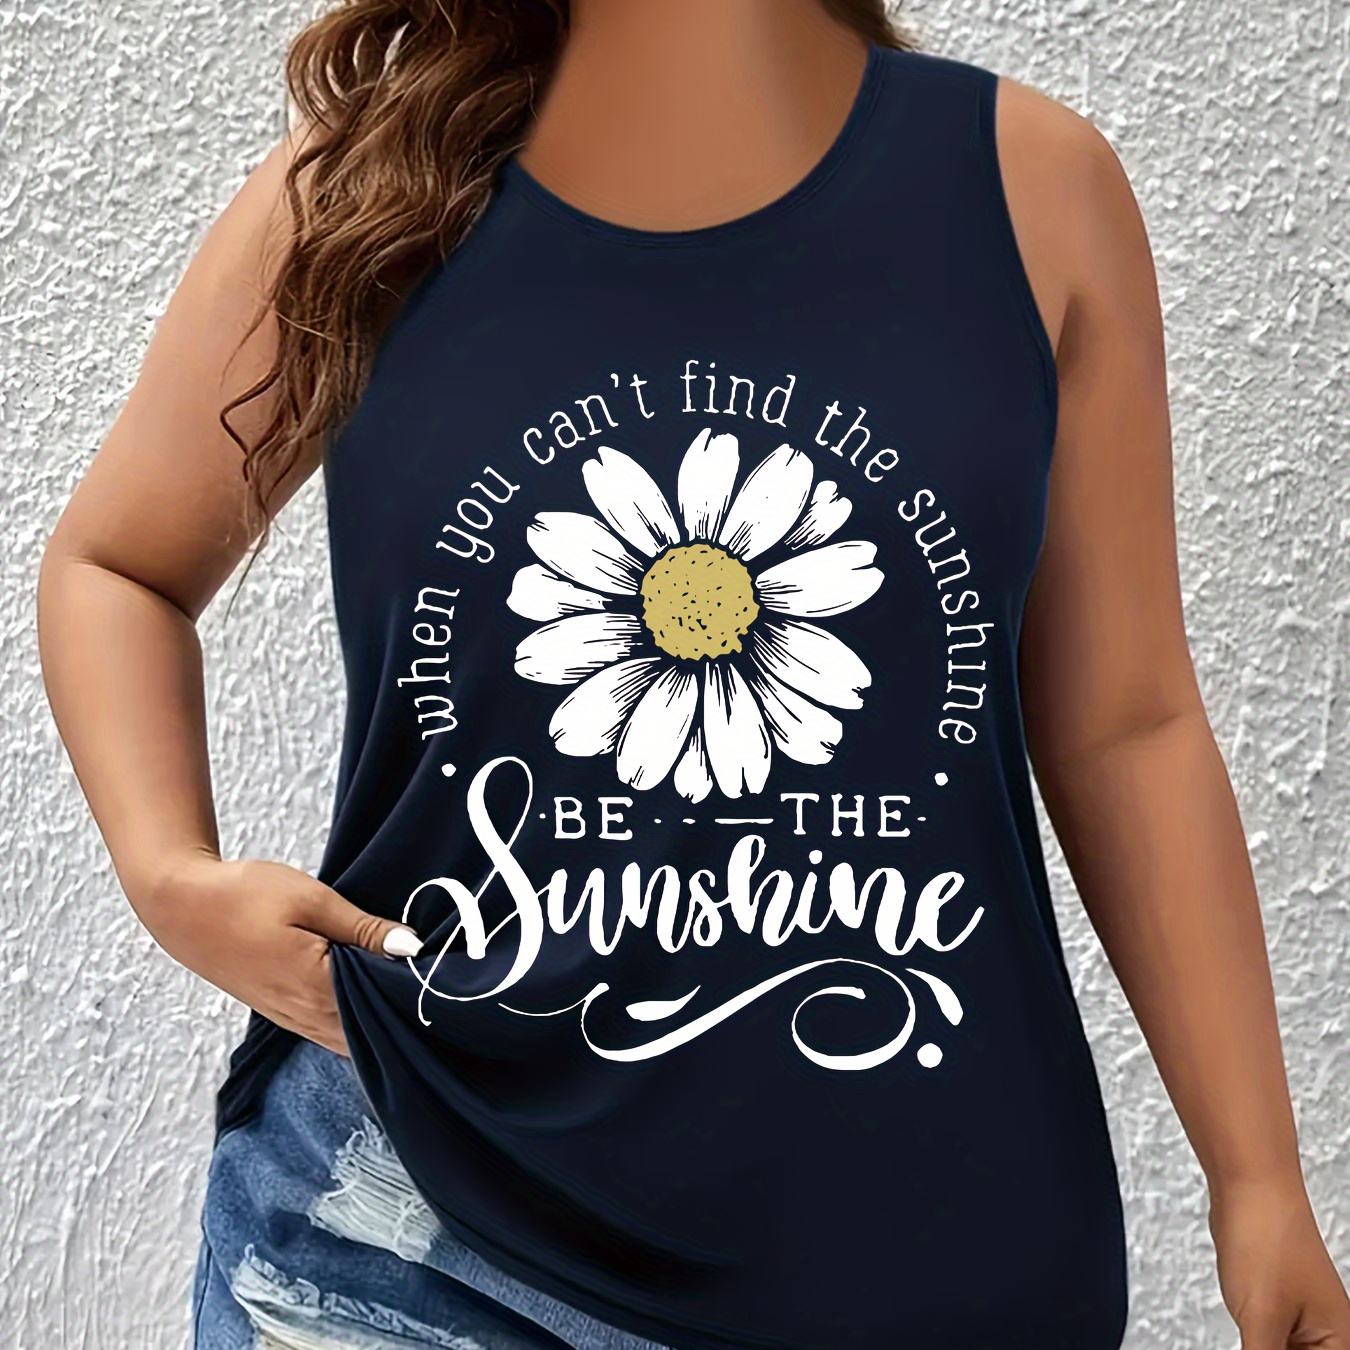 

Plus Size Sunshine Letter Print Tank Top, Casual Sleeveless Crew Neck Top For Summer & Spring, Women's Plus Size Clothing